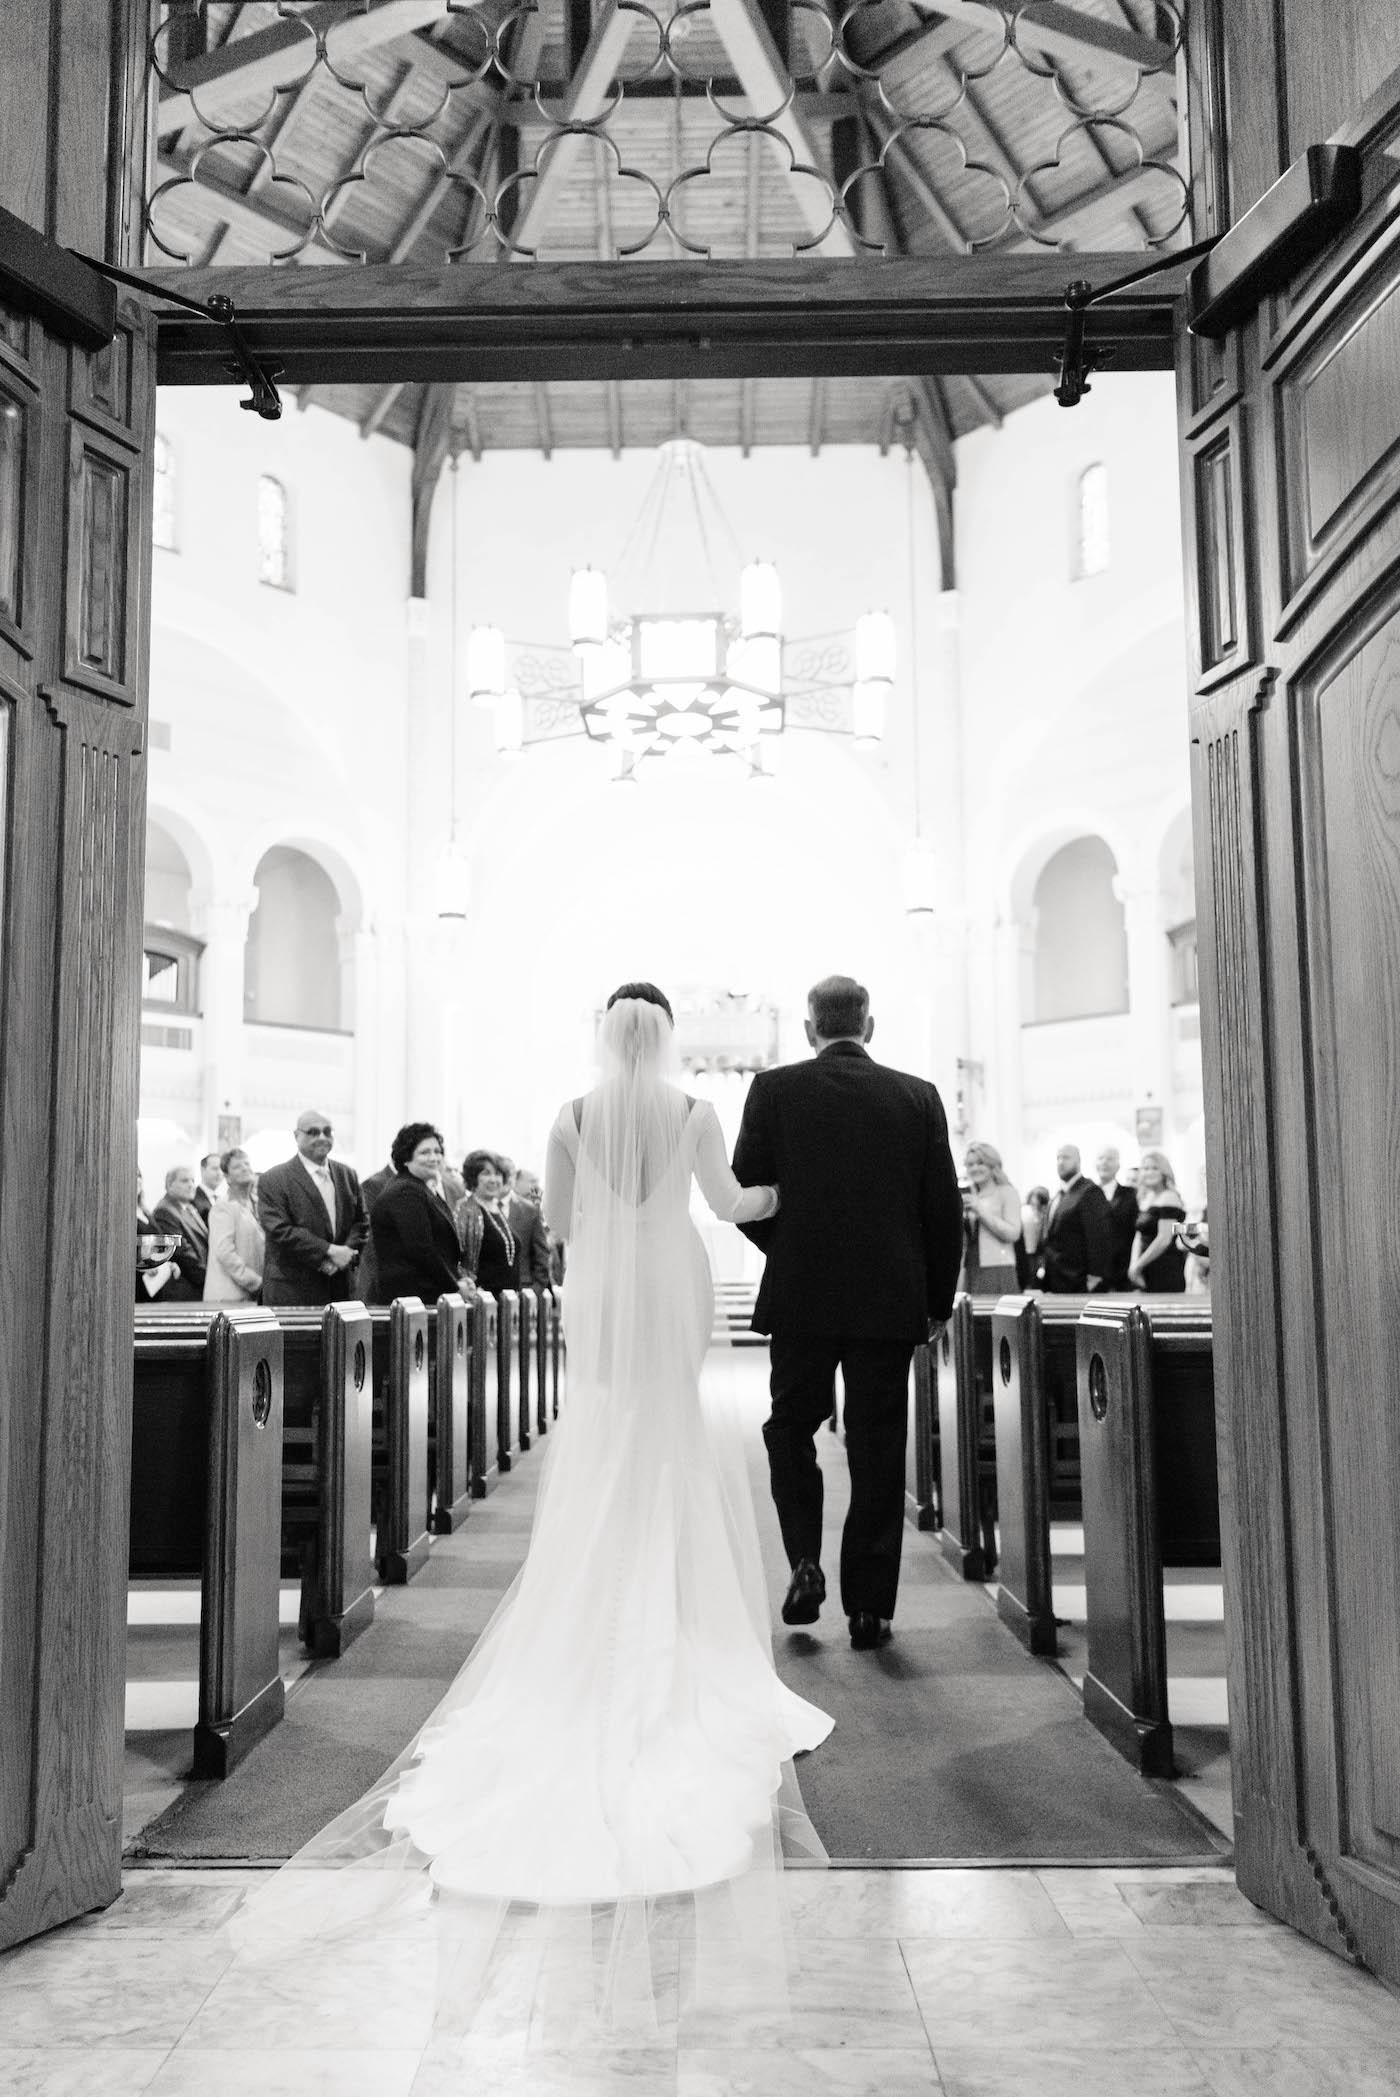 Florida Bride and Father Walk Down the Aisle in Traditional Wedding Processional | Black and White Wedding Ceremony Portrait | St. Mary Our Lady of Grace Catholic Church in St. Petersburg | Tampa Bay Wedding Planner Parties A'La Carte